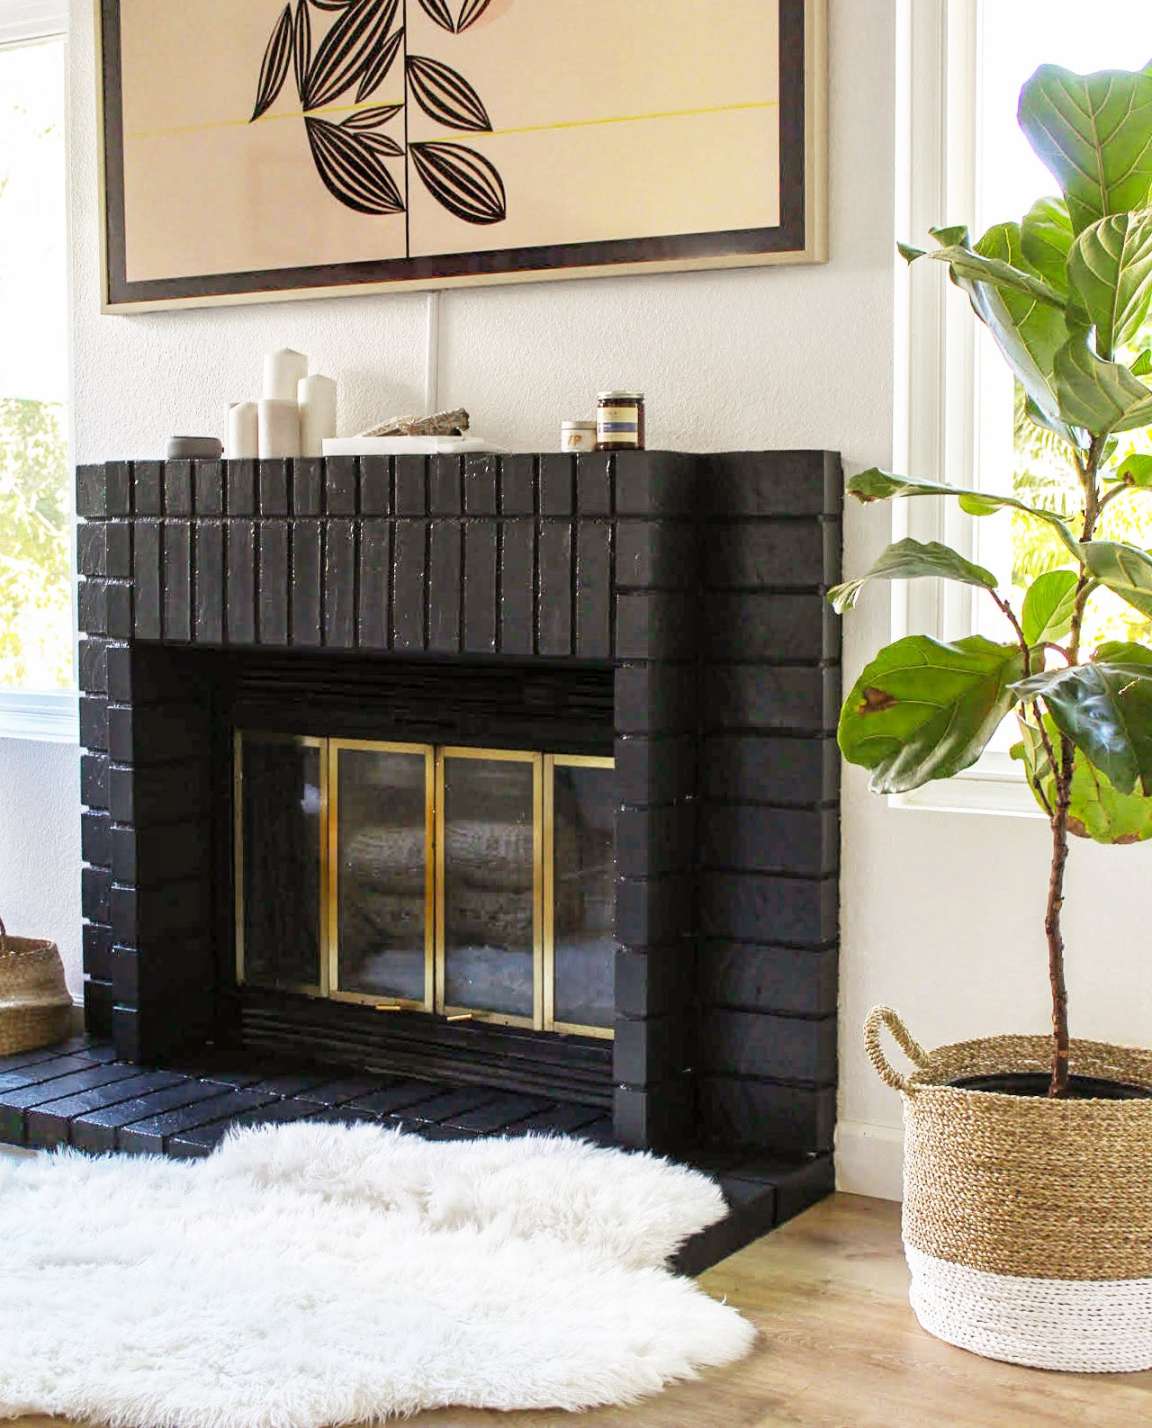 How A Painted Brick Fireplace Will Change Your Living Room – Clare